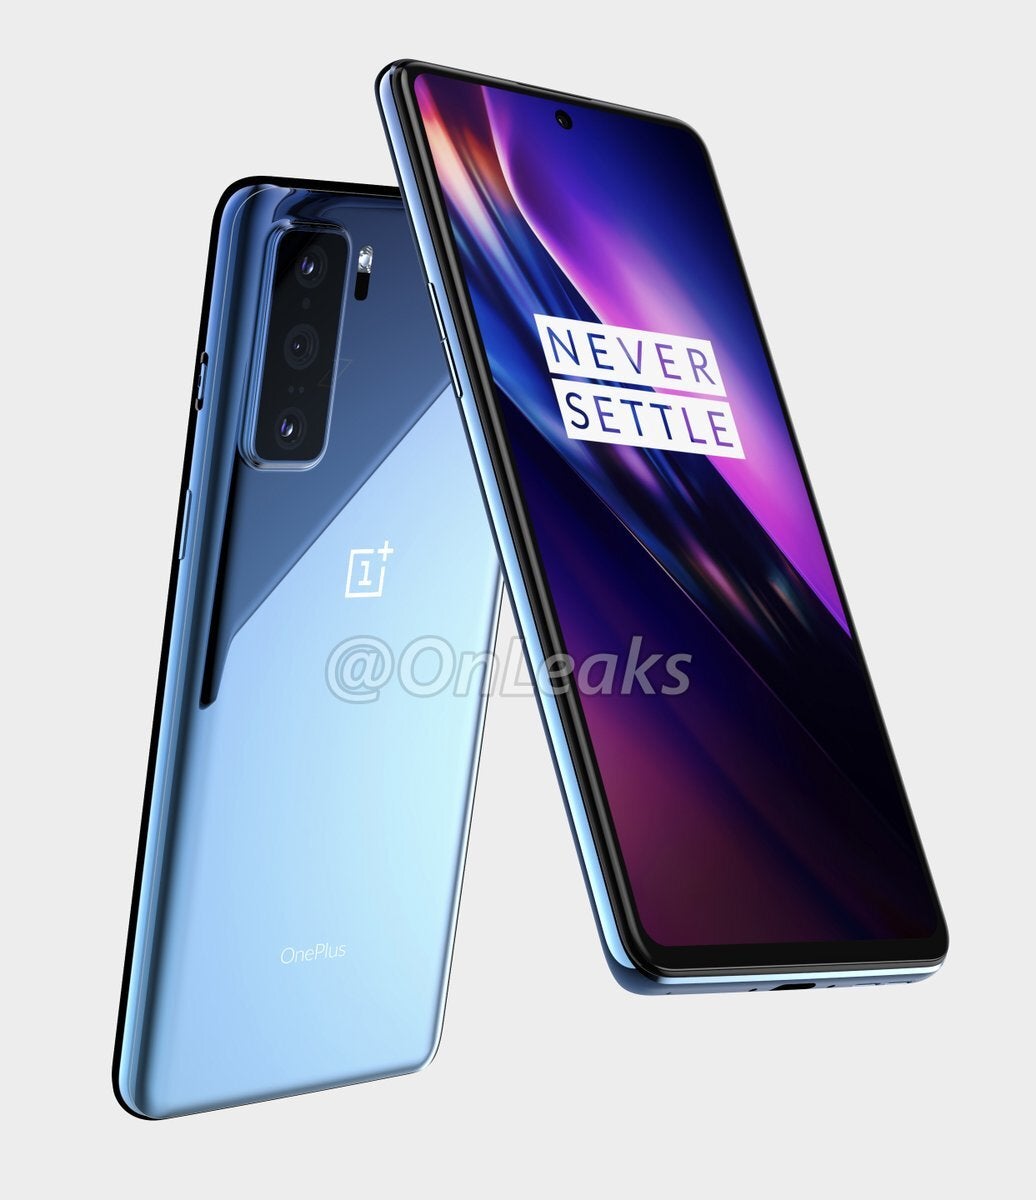 The OnePlus 8 Lite may actually be called the OnePlus Z